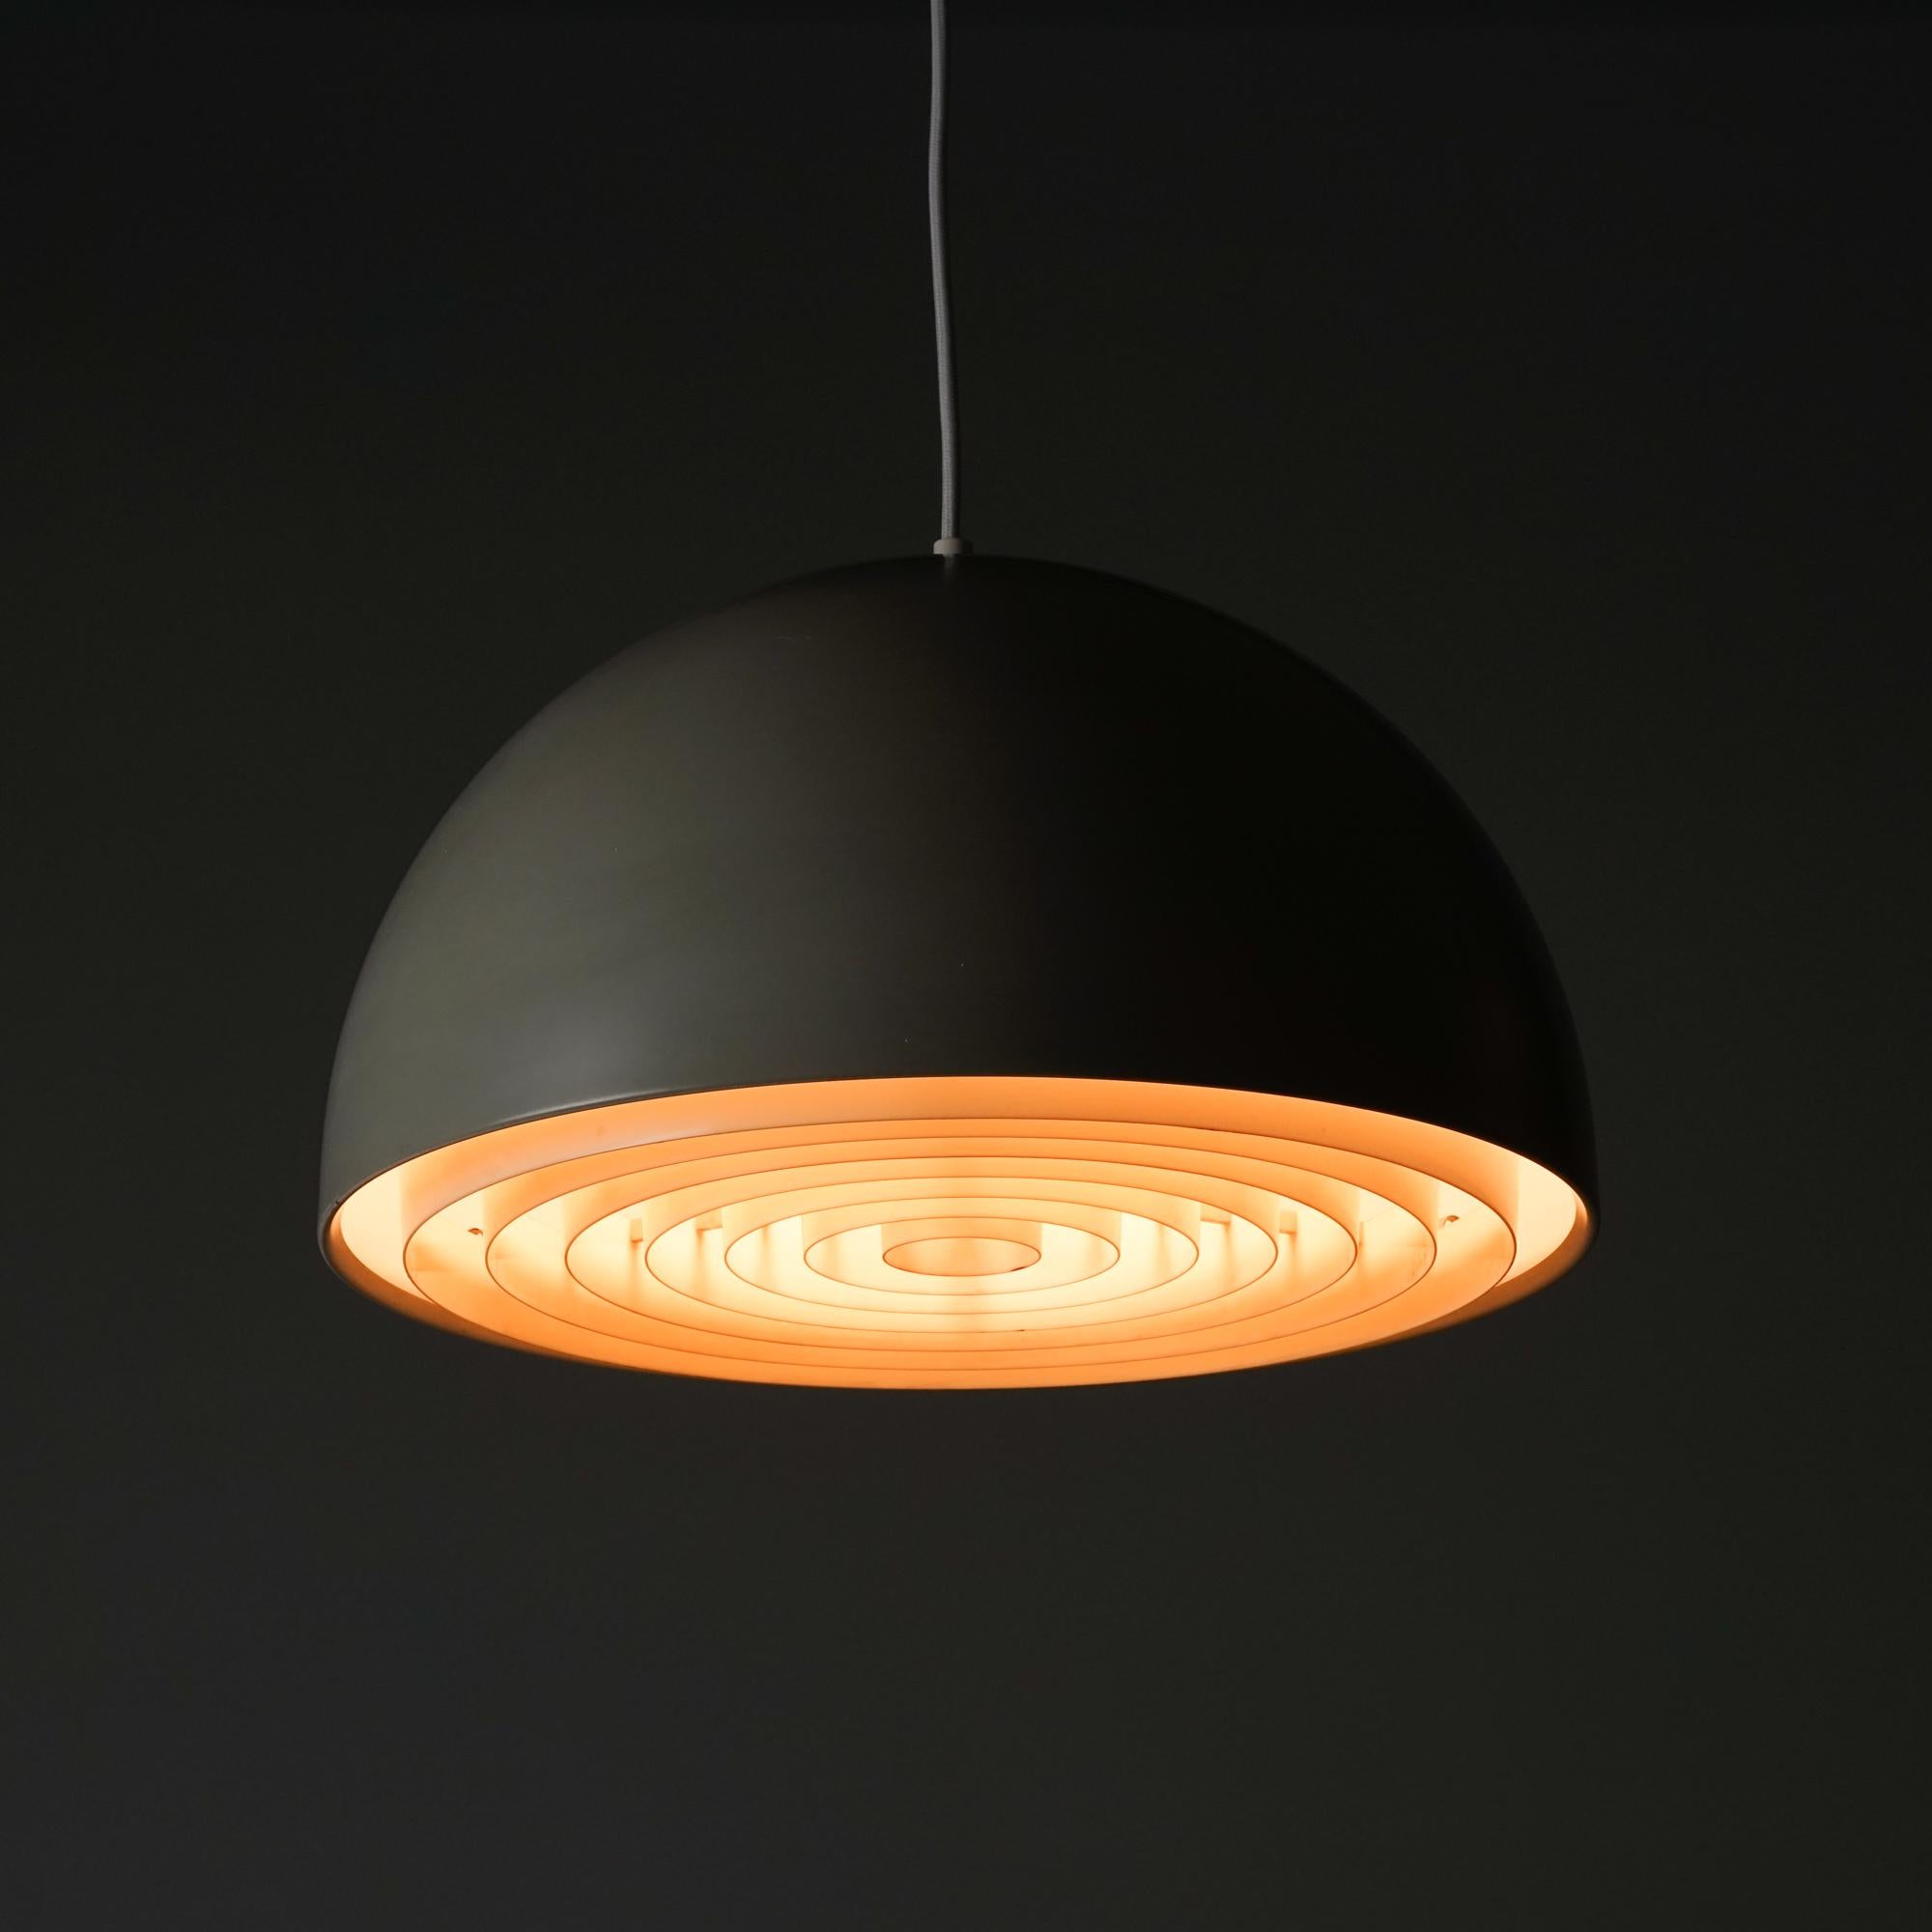 Mid-Century Modern pendant model Louisiana designed by Vilhelm Wohlert and Jørgen Bo in 1967, manufactured by Louis Poulsen in the 1960s. Plastic. A classic Scandinavian mid-century modern piece. Perfect on top of the dining table. Good original